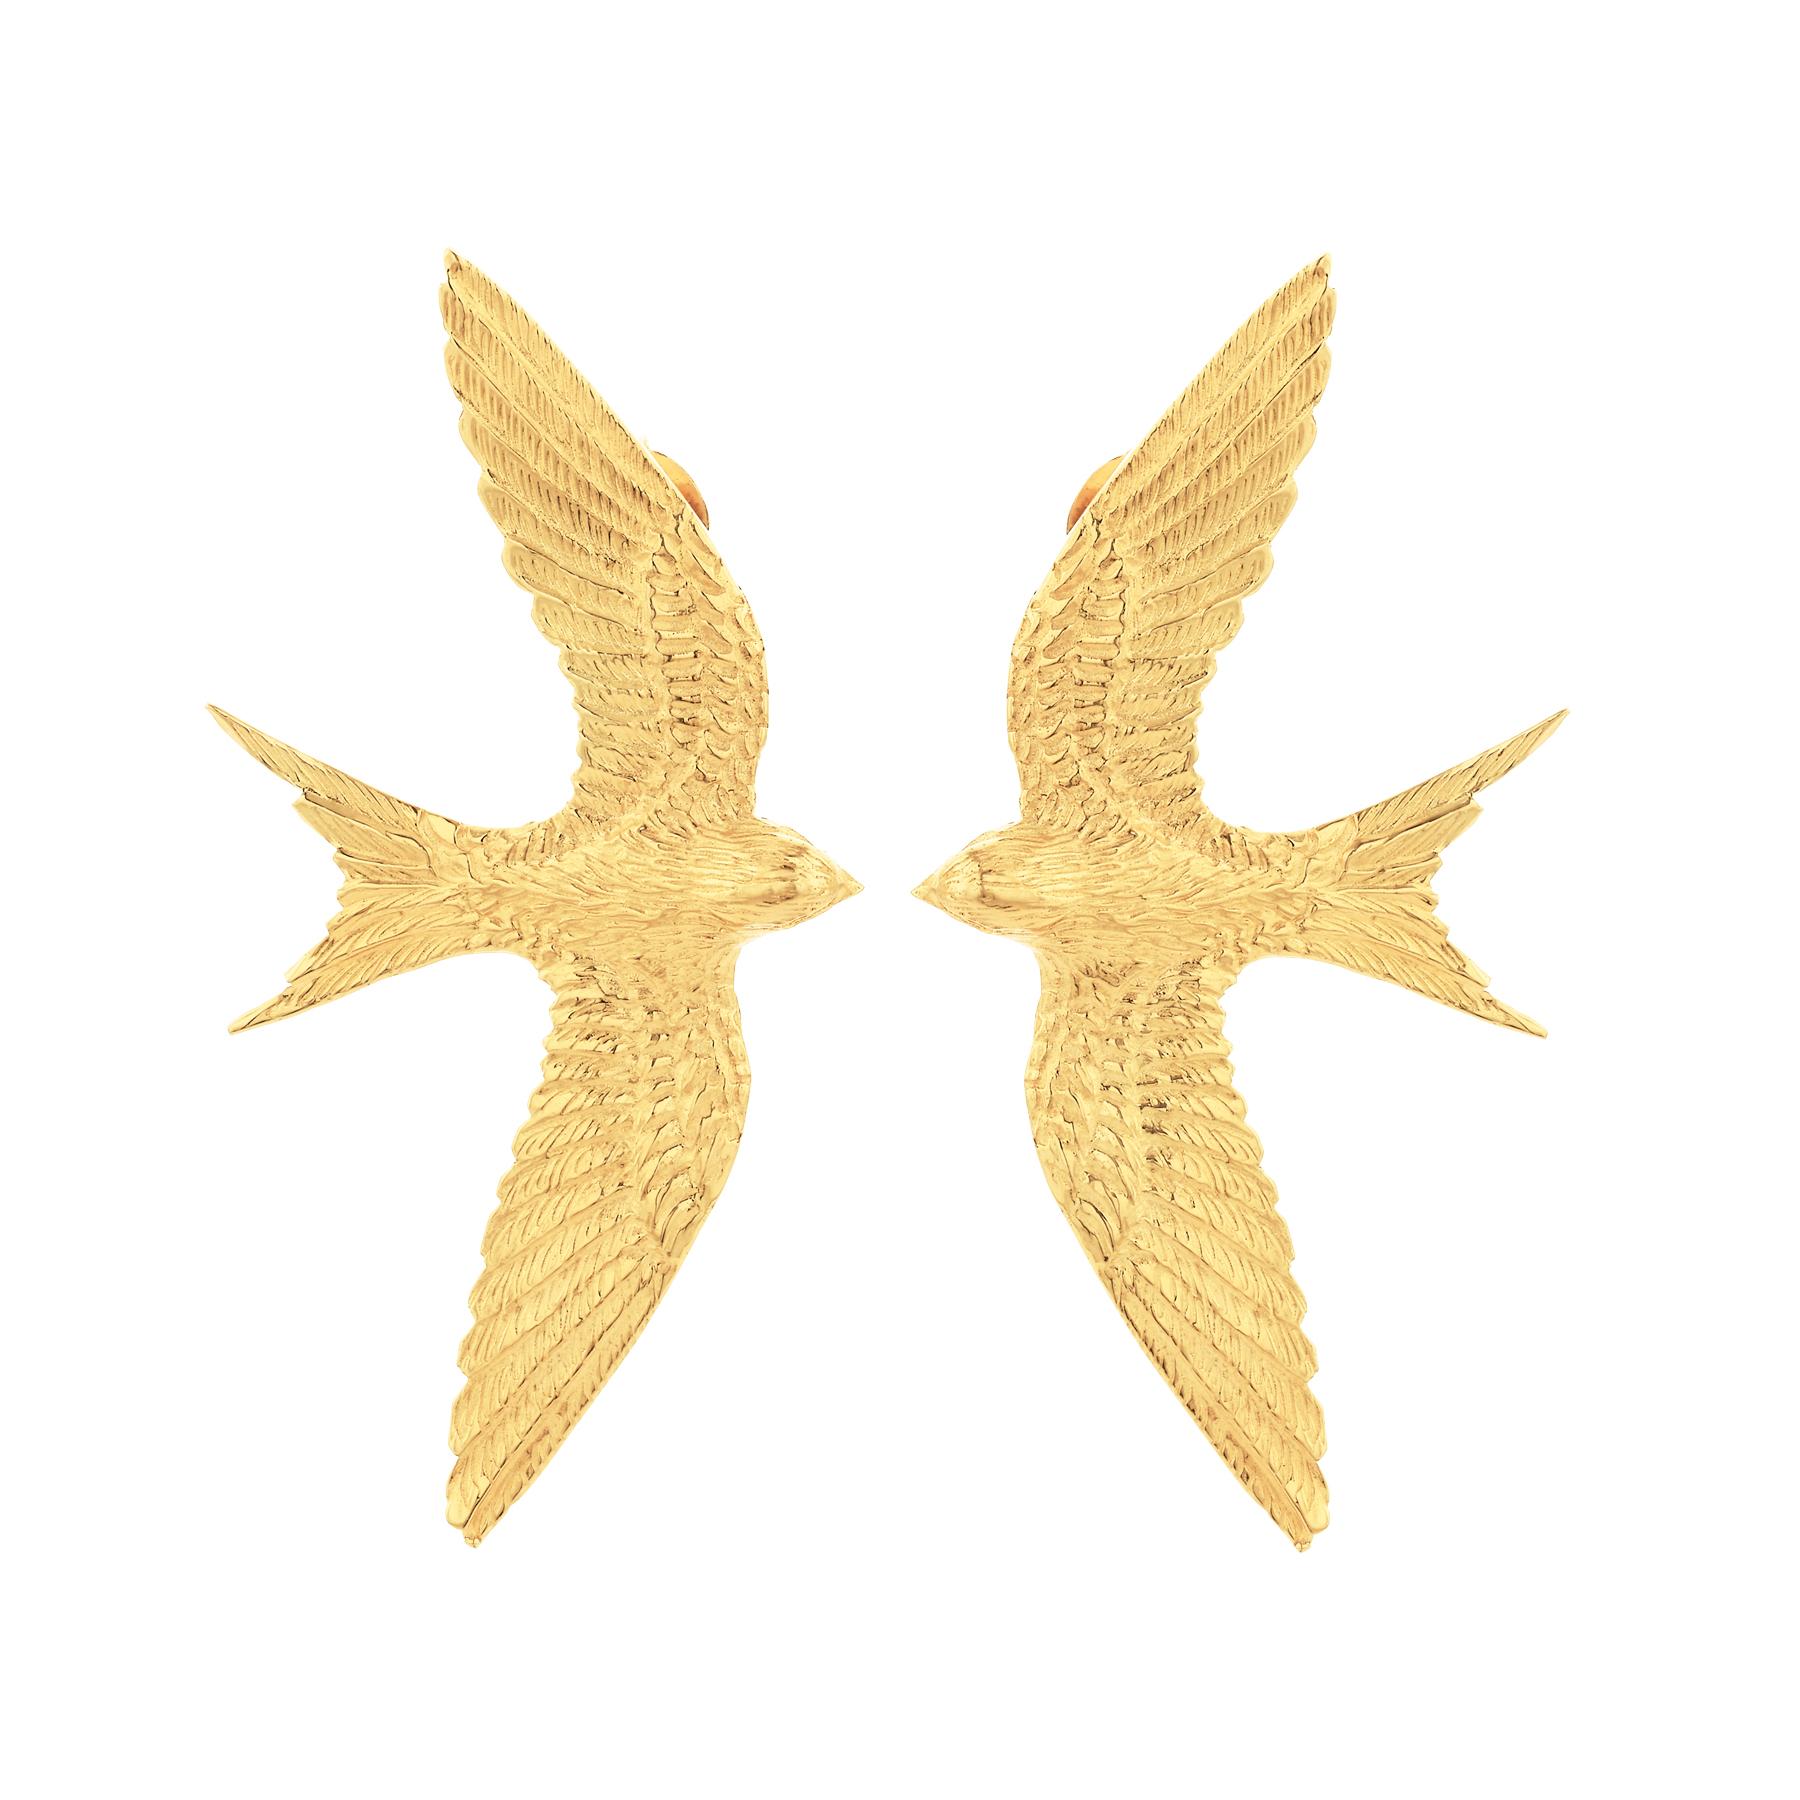 The swallow birds, once paired, remain together for life. They are a symbol of both freedom and loyalty. Even after distant travels, they reunite and stay close to one another. Our Lover earrings are lovingly hand carved from wax models, which